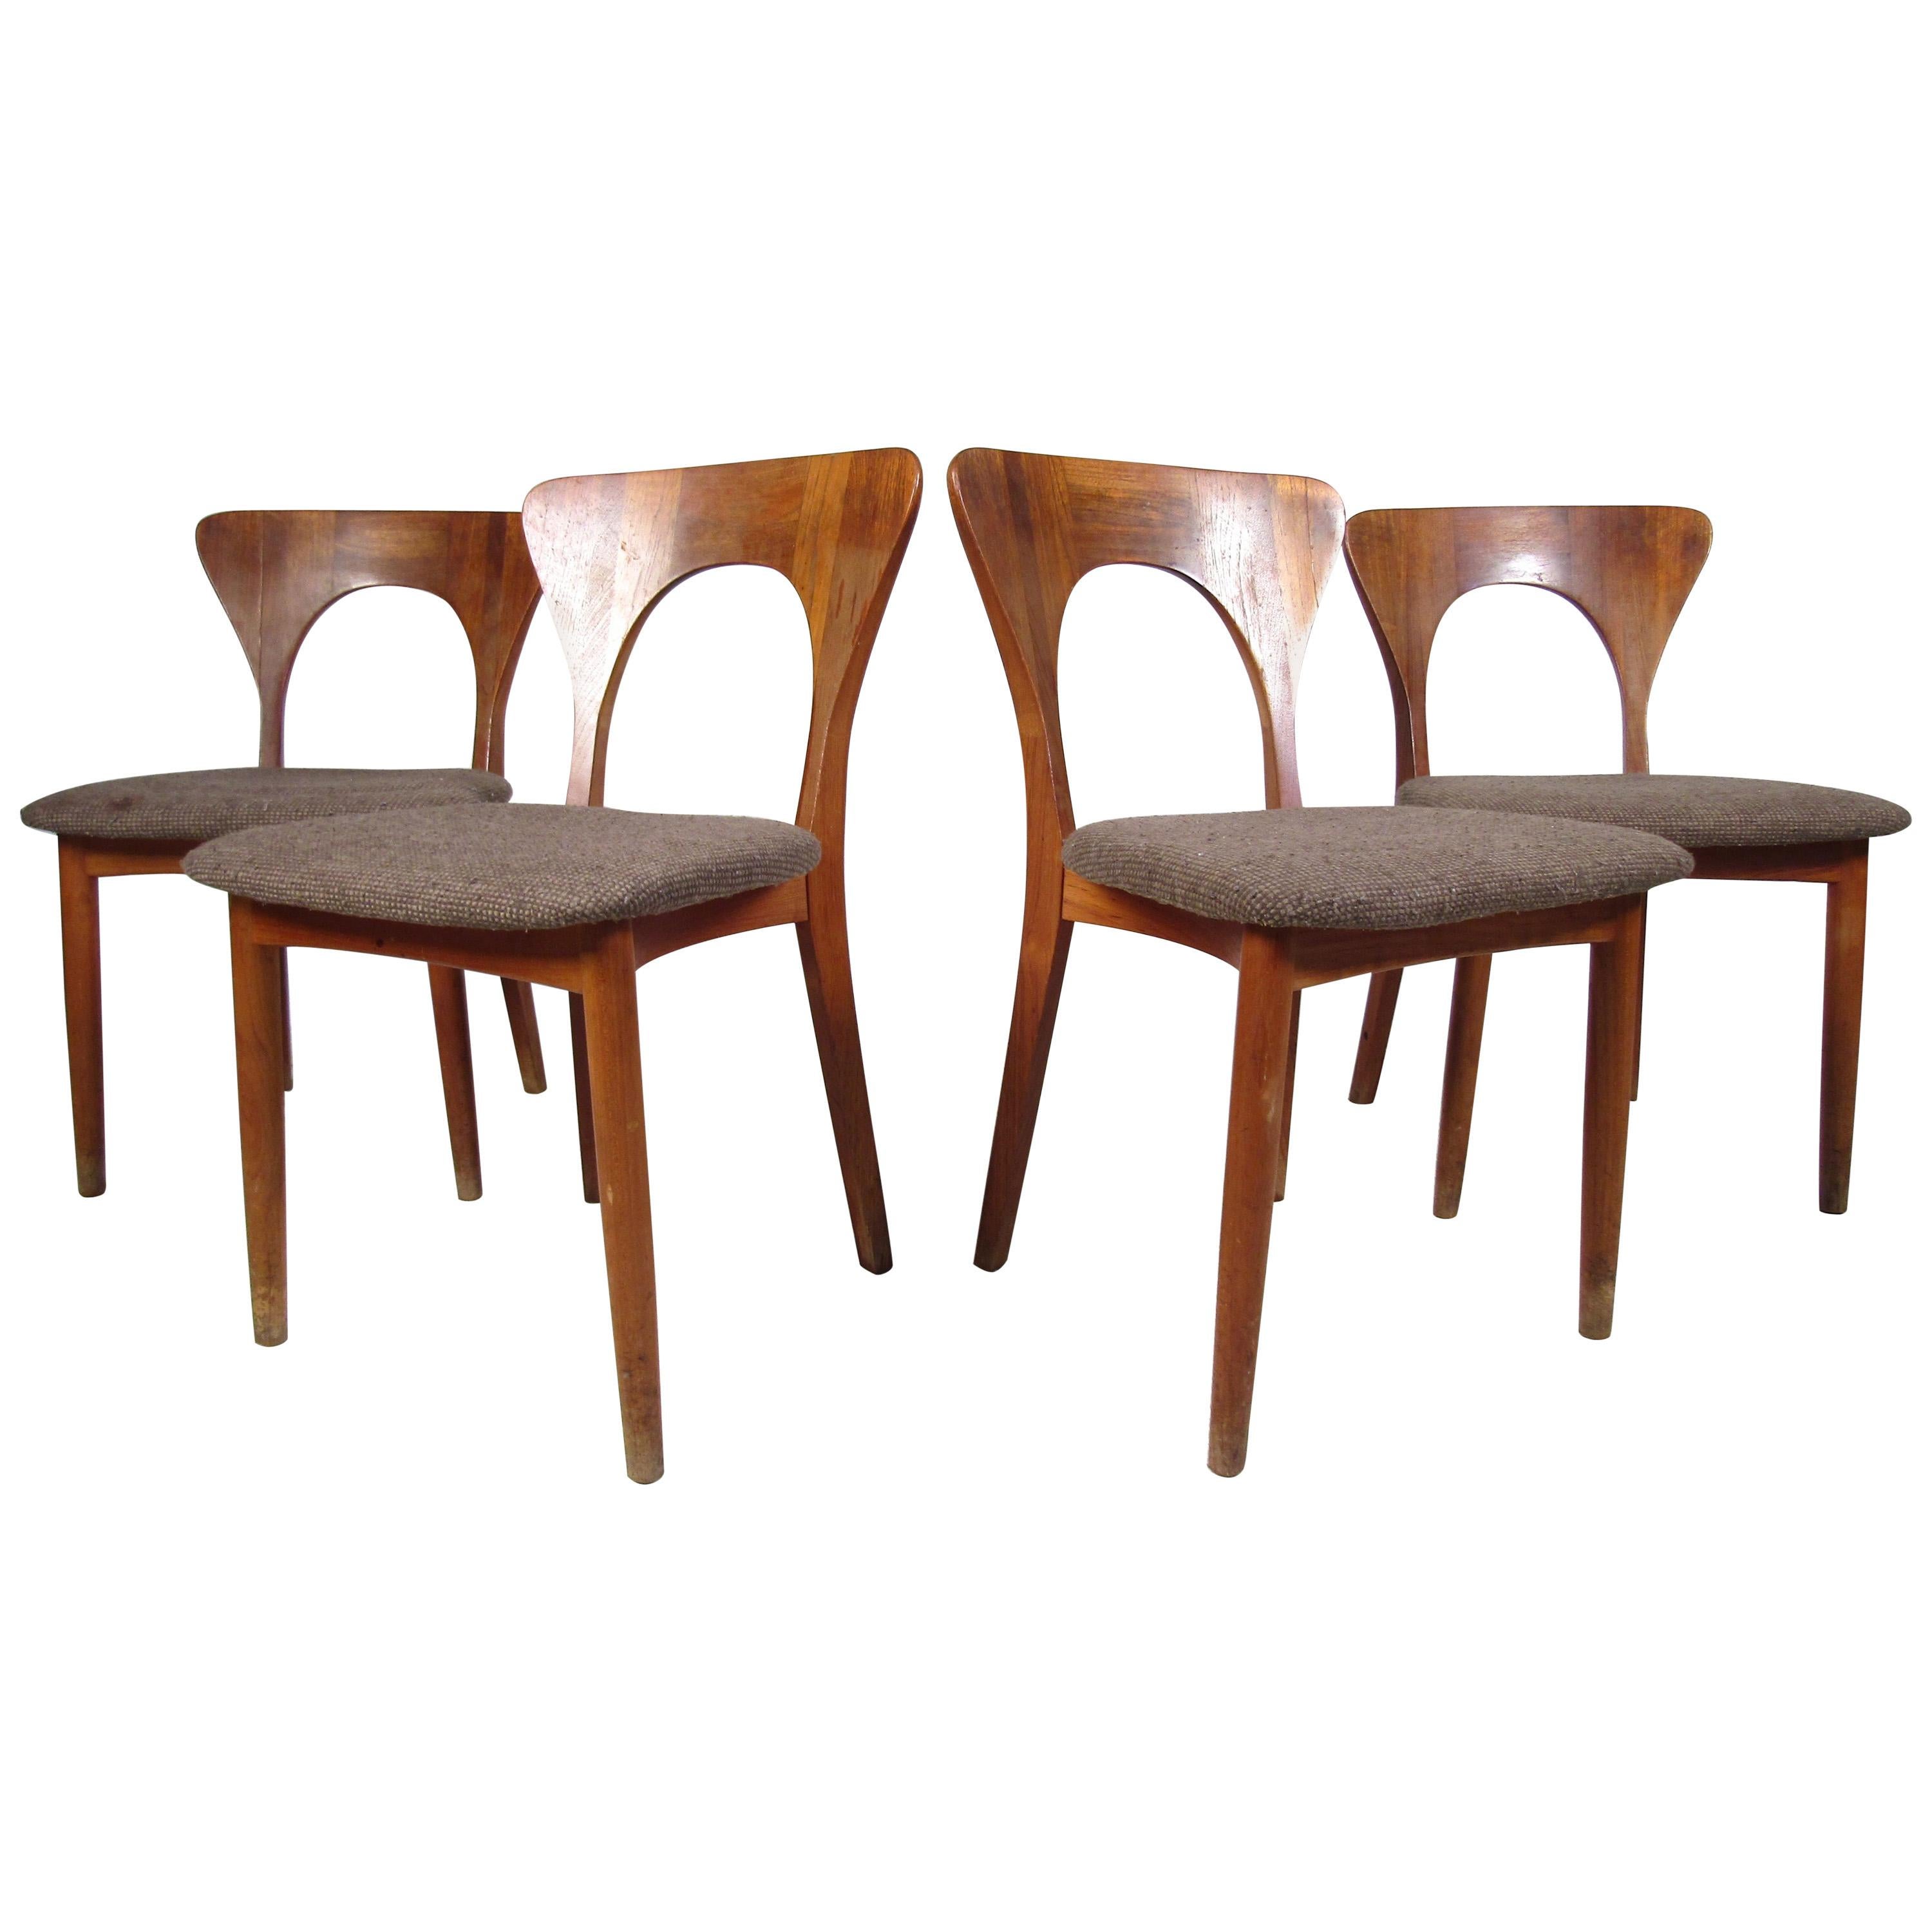 Set of Four Unusual Midcentury Walnut Dining Chairs